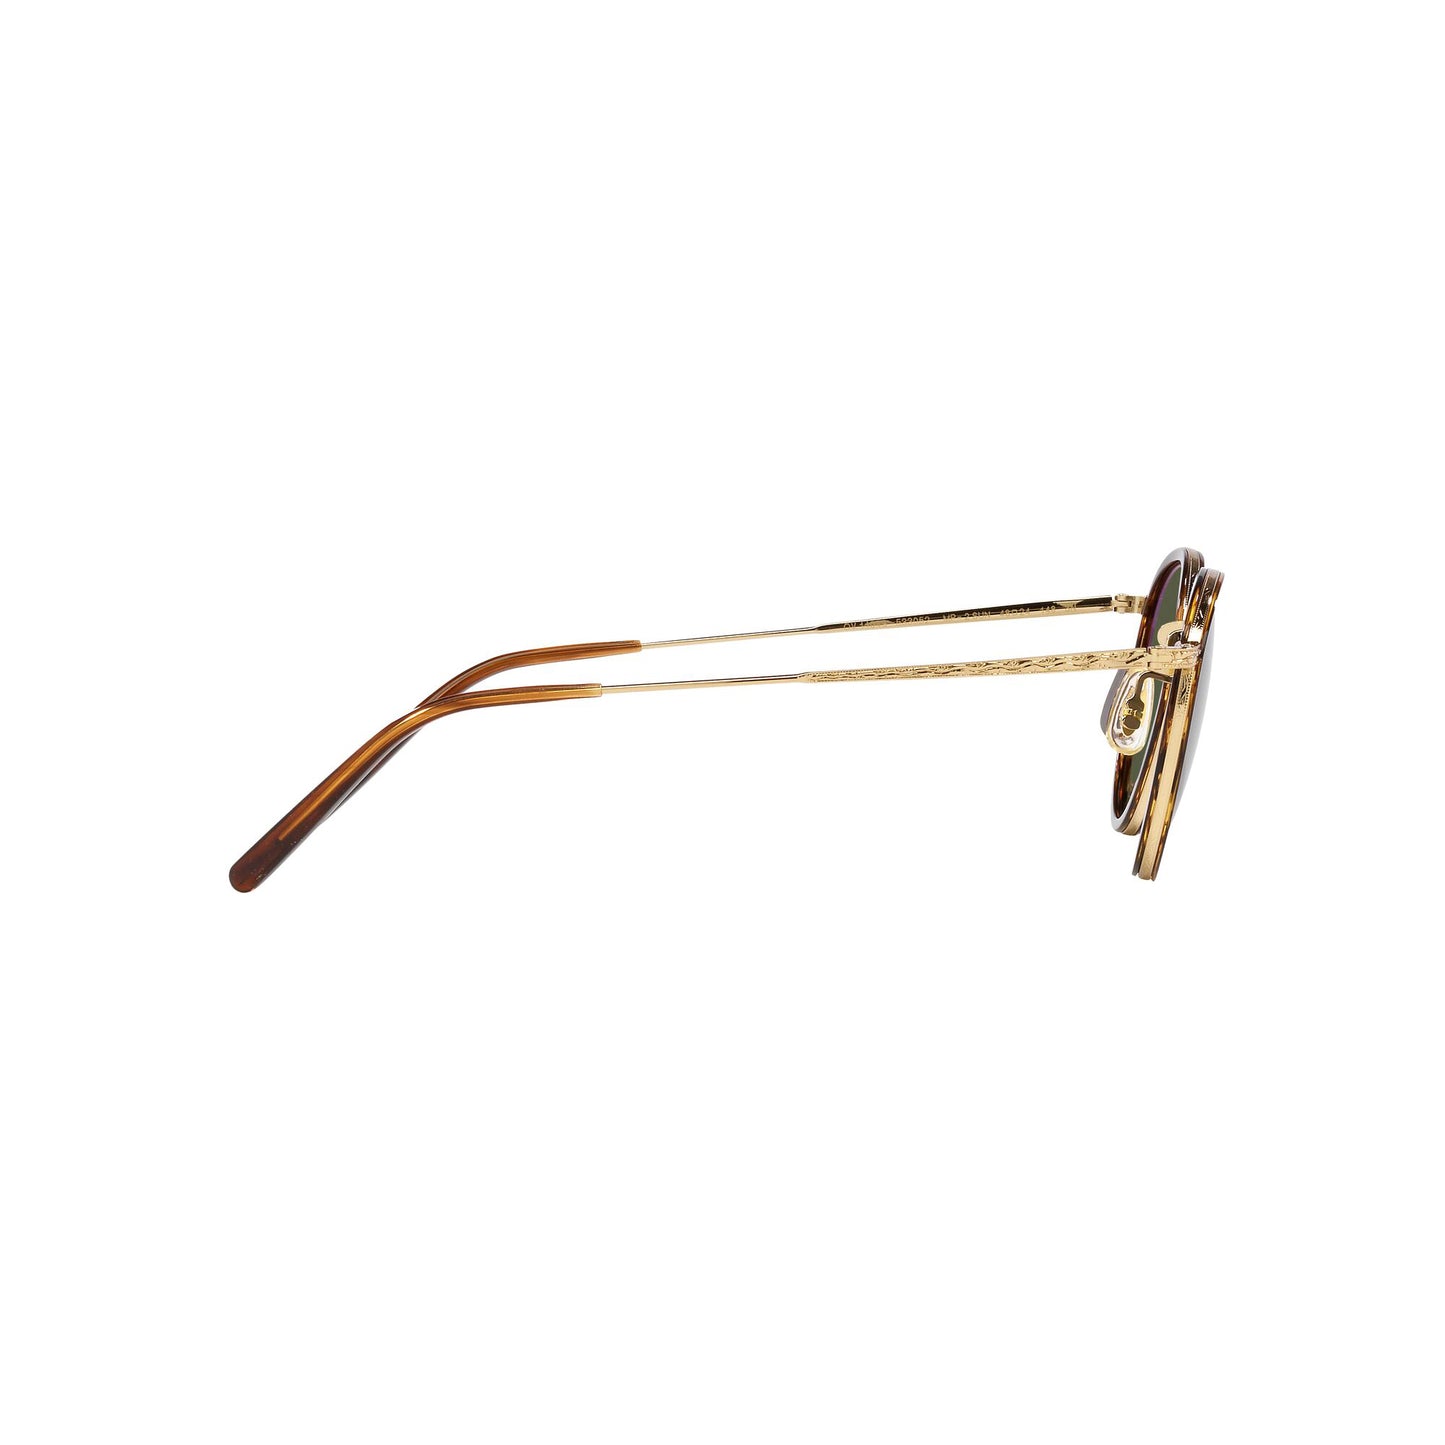 OLIVER PEOPLES MP-2 SUN TUSCANY TORTOISE/ GOLD W/G15 LENS